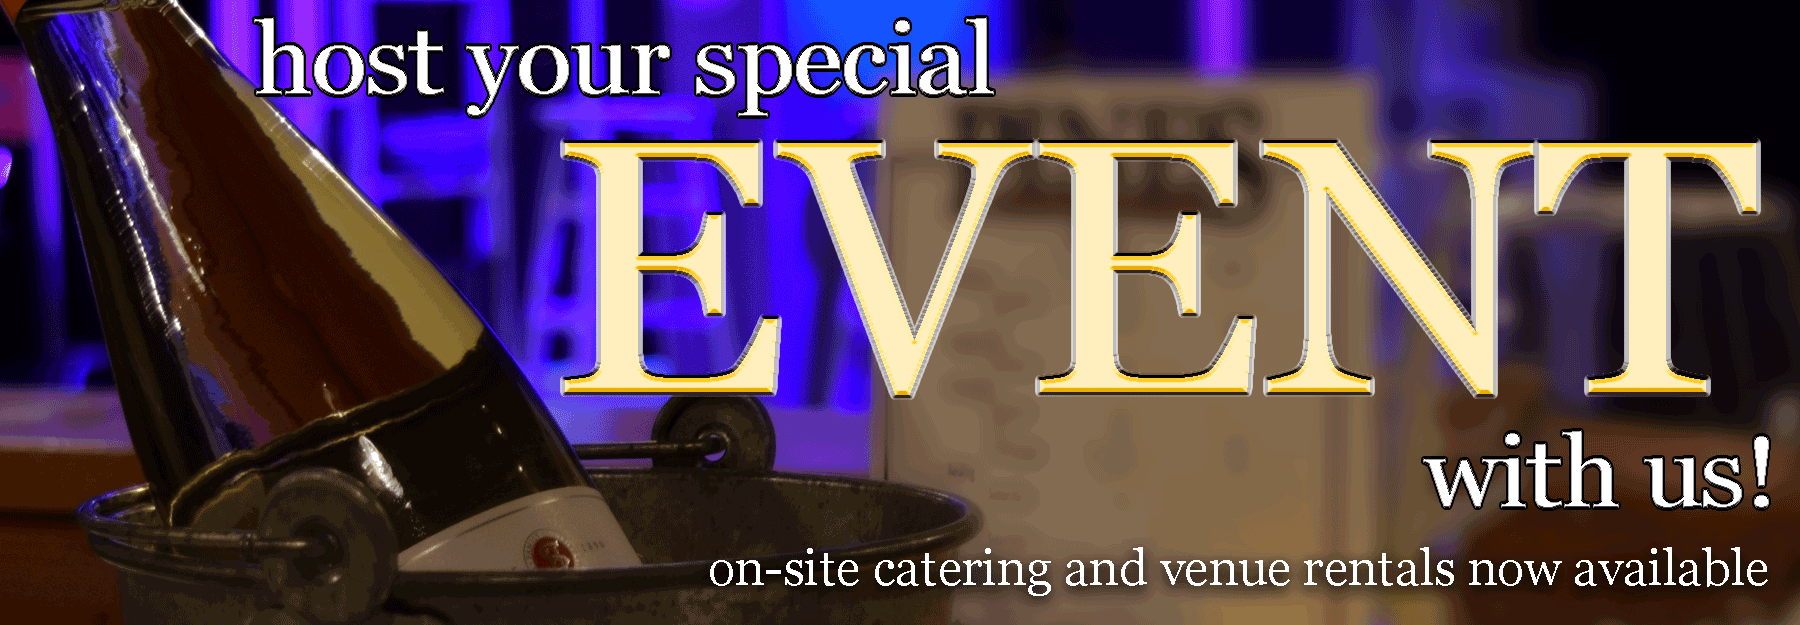 Cater your next special event or private party at the Pines Dinner Theatre.